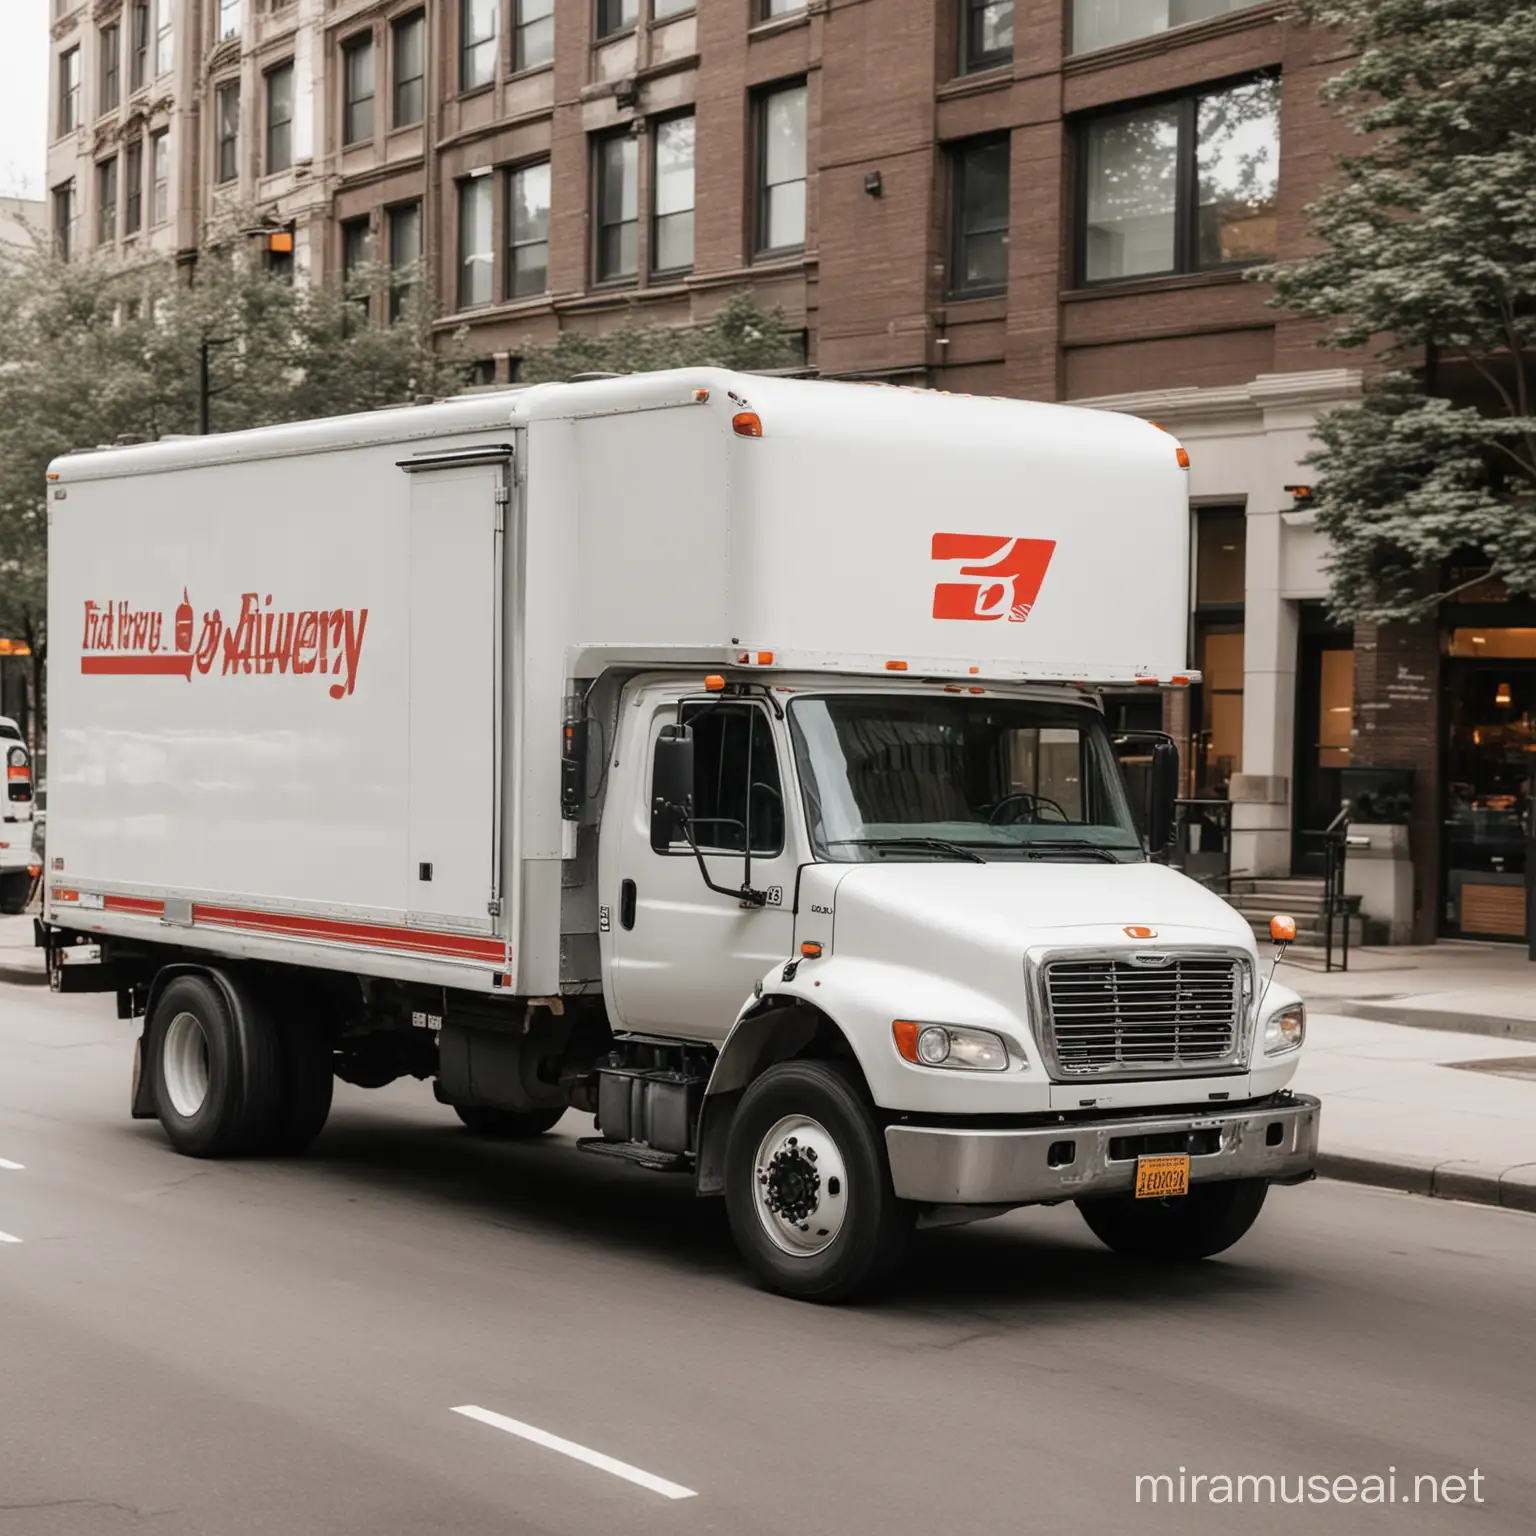 A picture of a delivery truck
